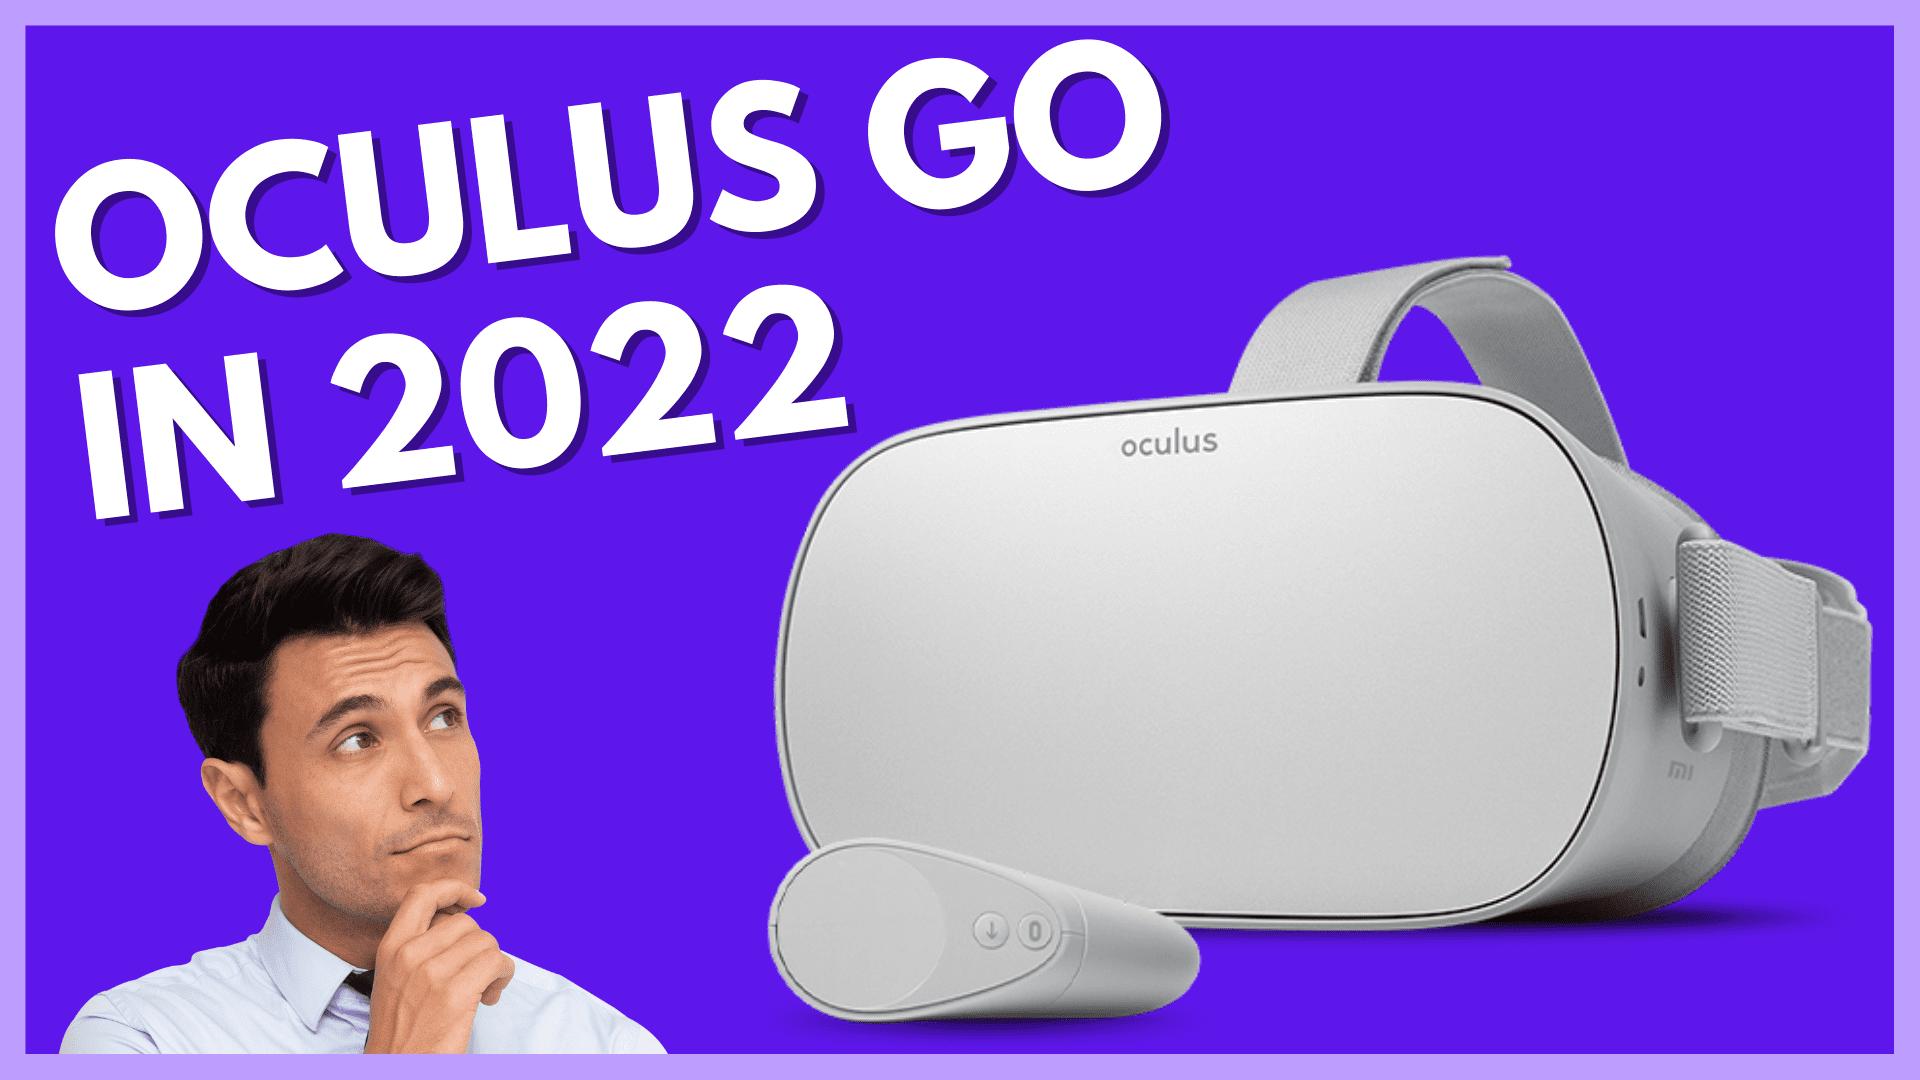 Buying An Oculus Go in 2022